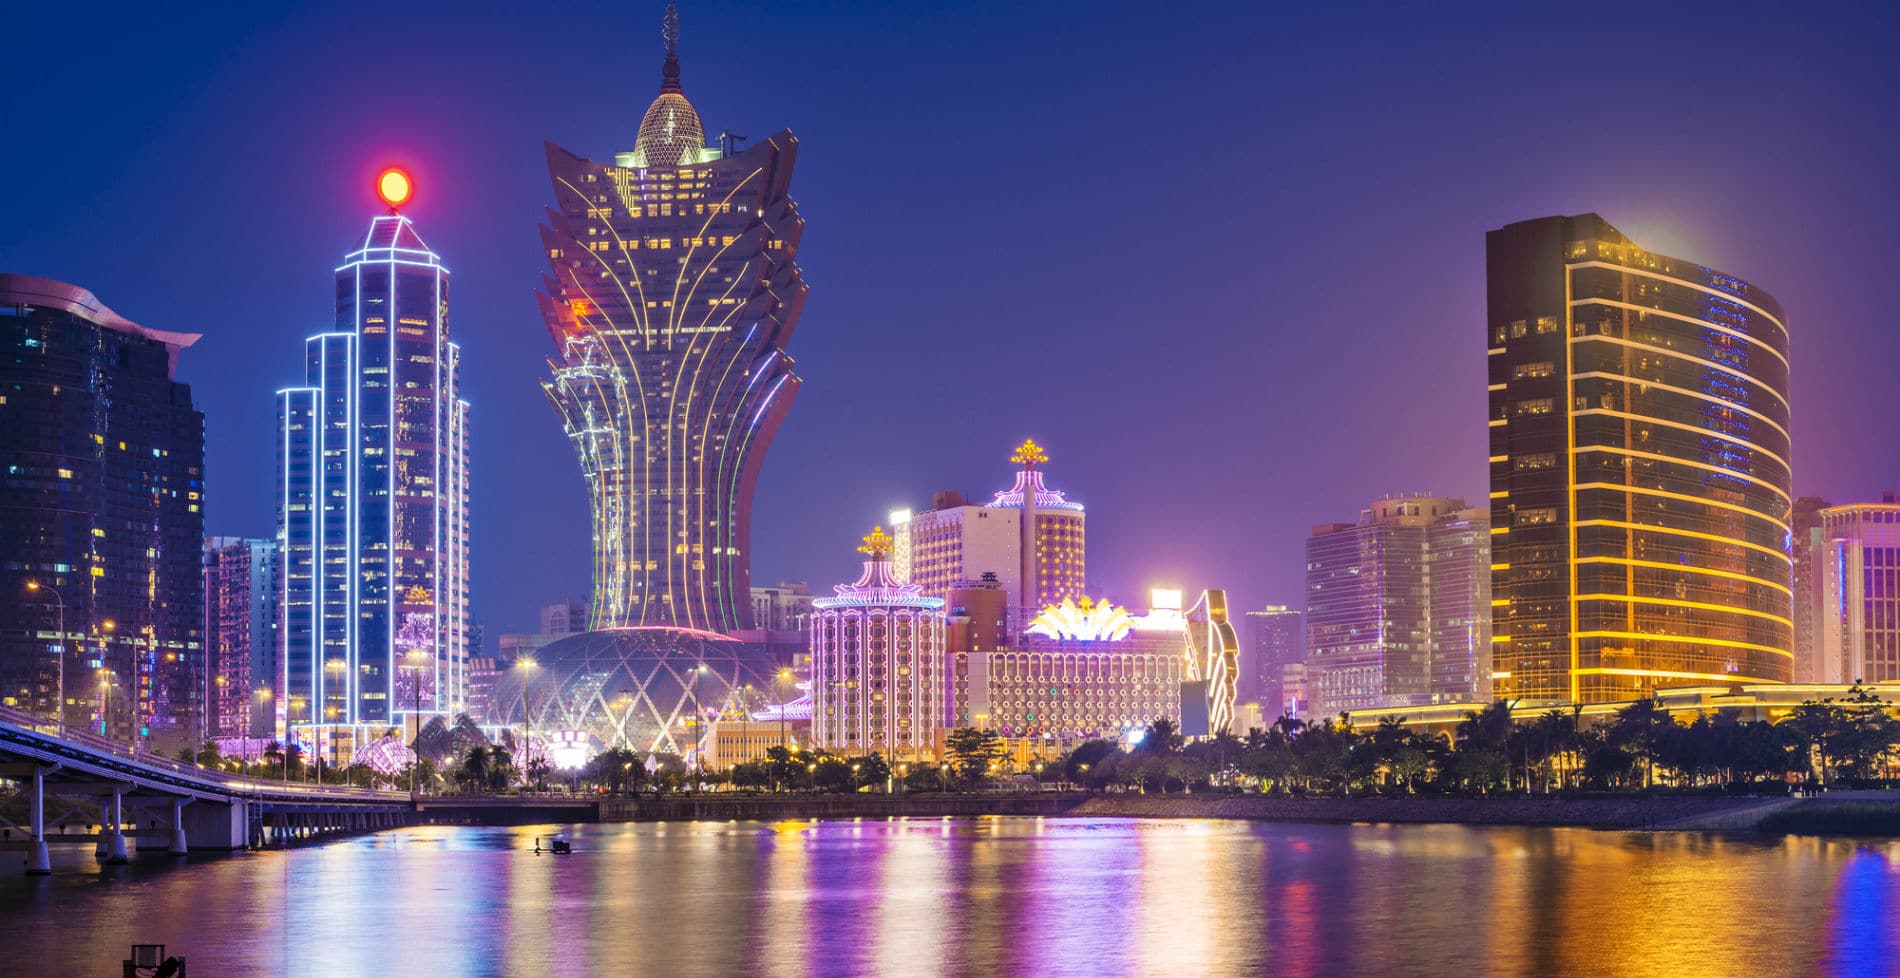 Macau offers China-style architecture and gambling. (Photo internet reproduction)